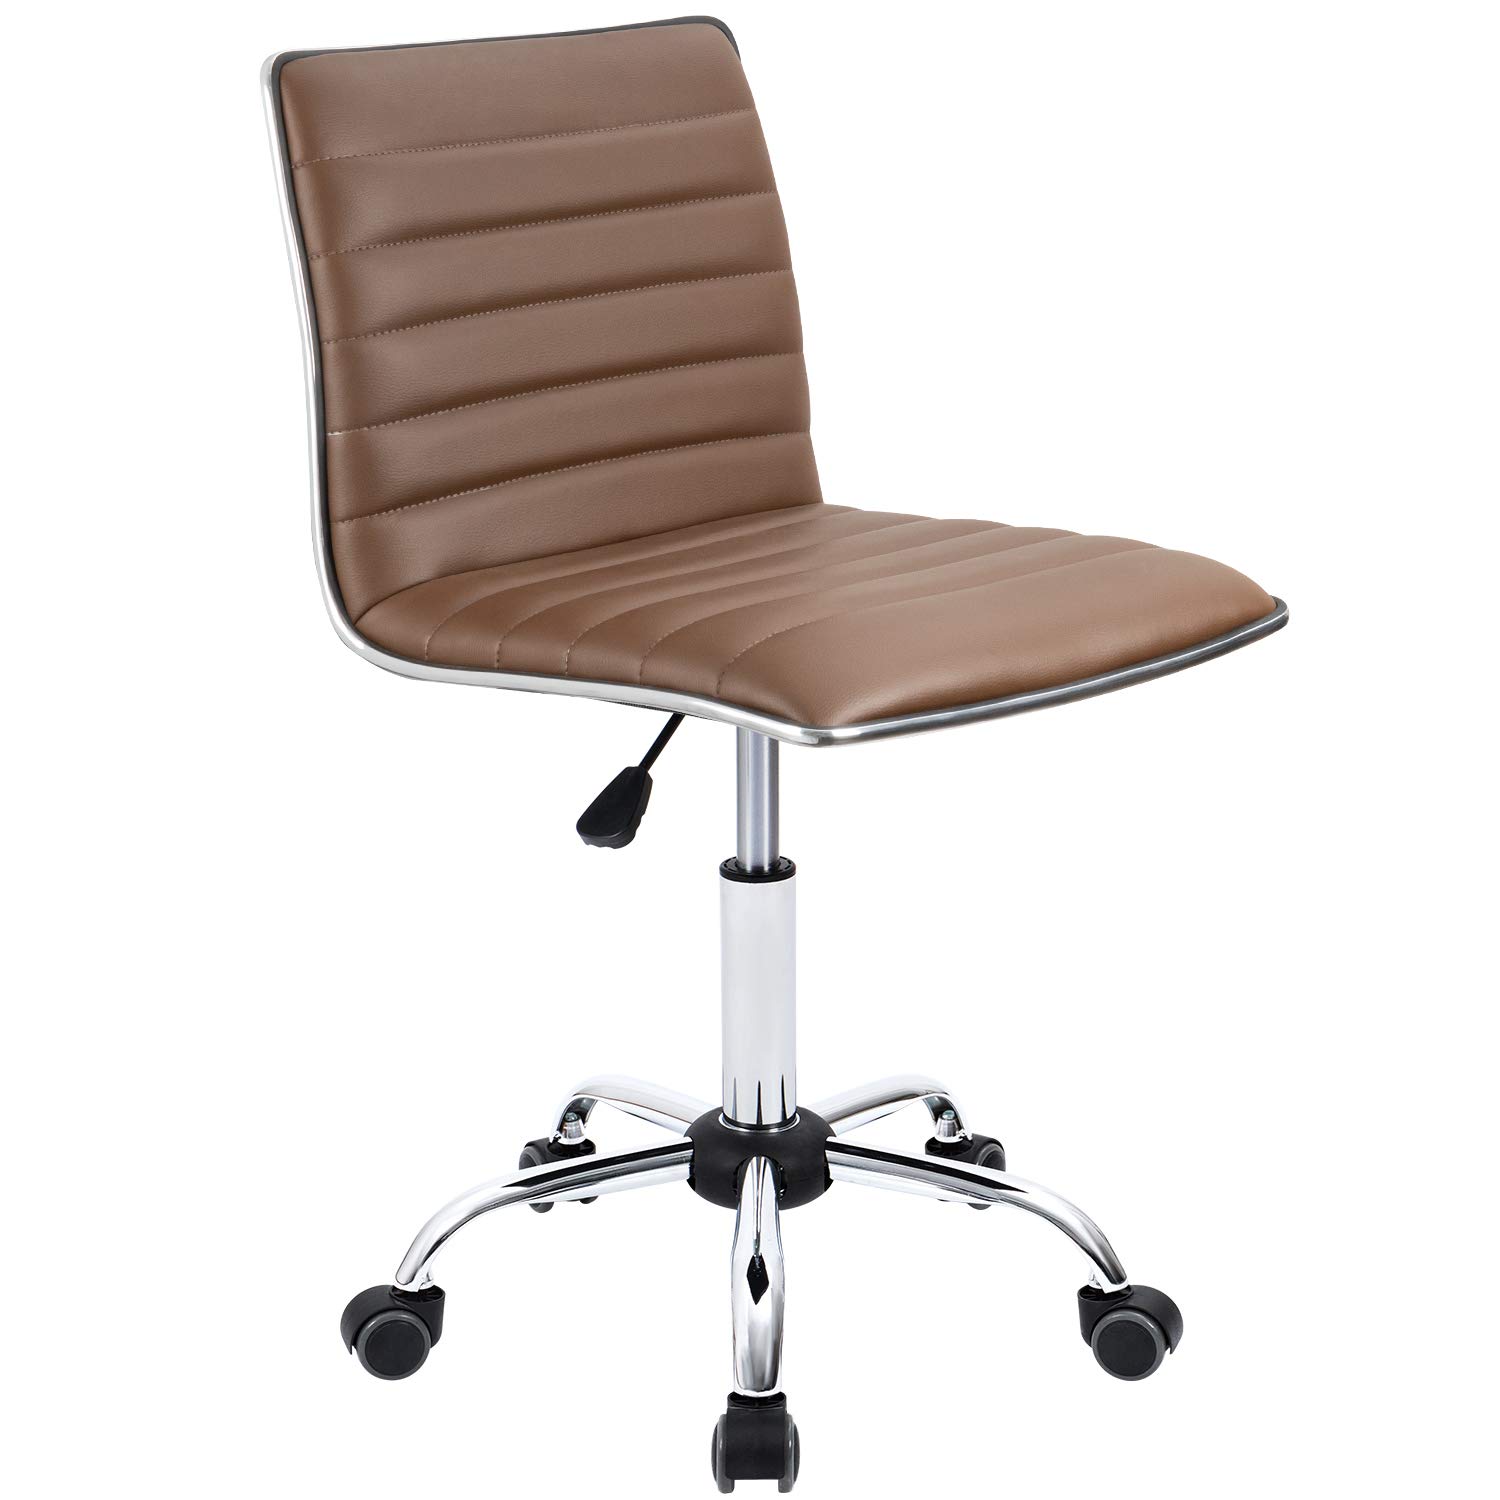 Lacoo Faux Leather Mid Back Task Chair Swivel Office Desk Chair, Brown - image 1 of 6